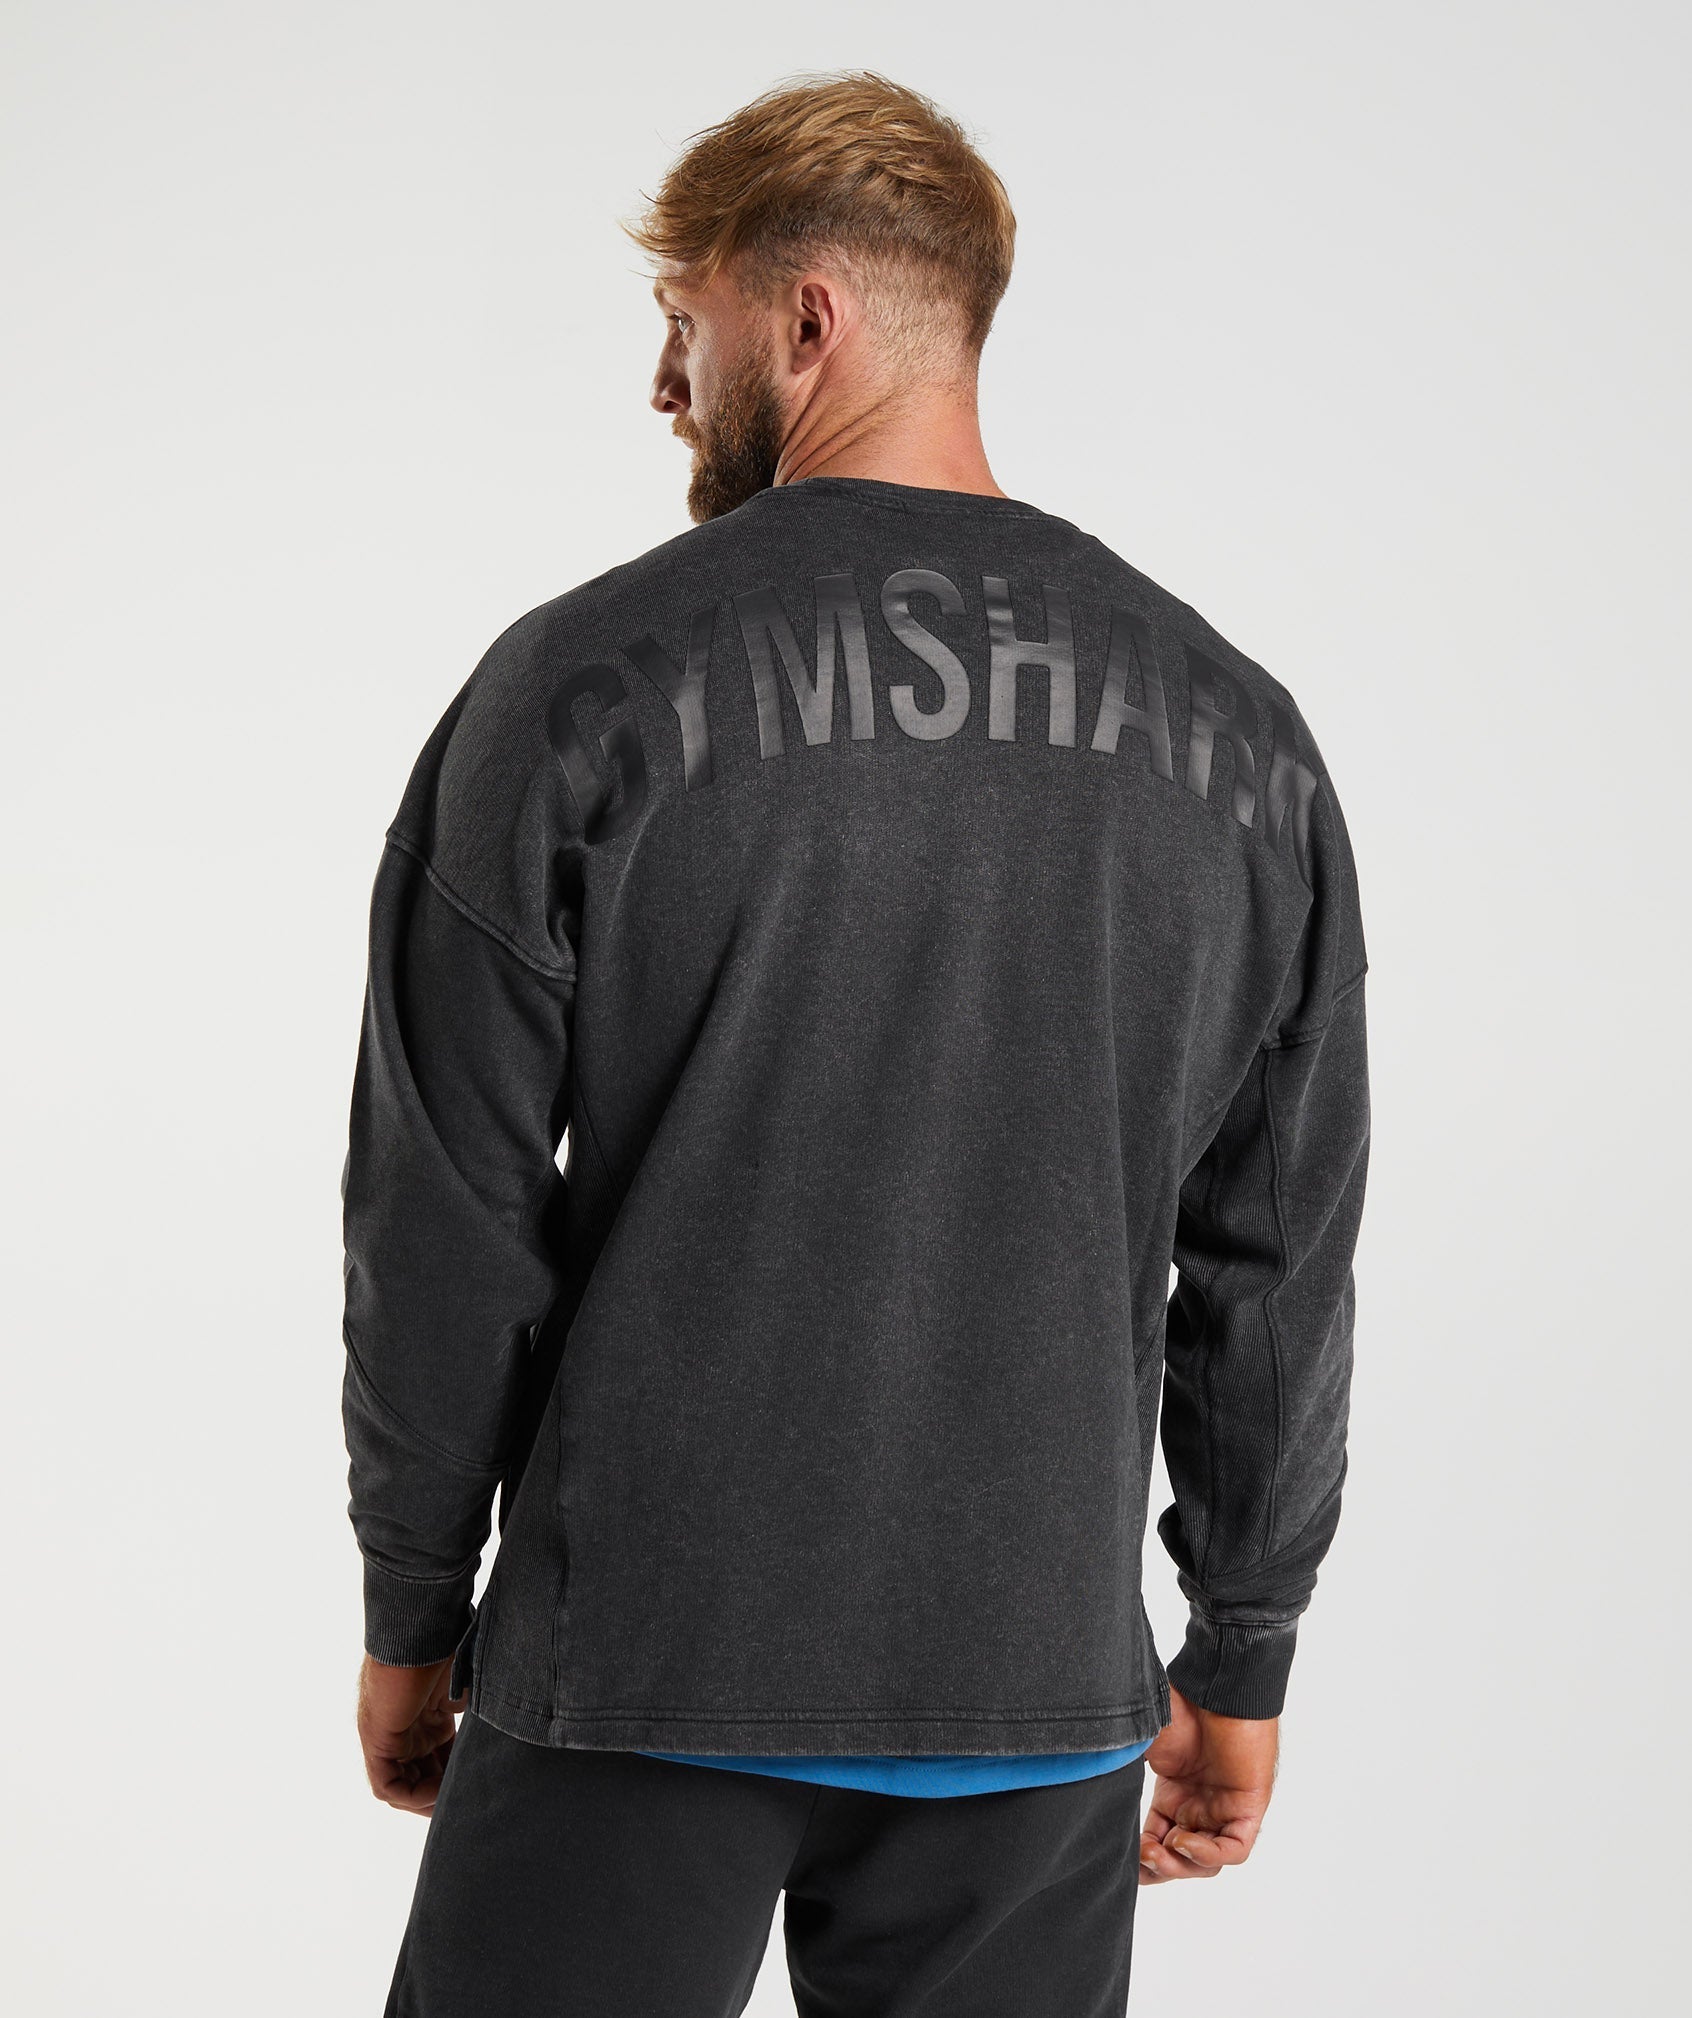 Pull Gymshark Gris taille XS International en Synthétique - 22498860